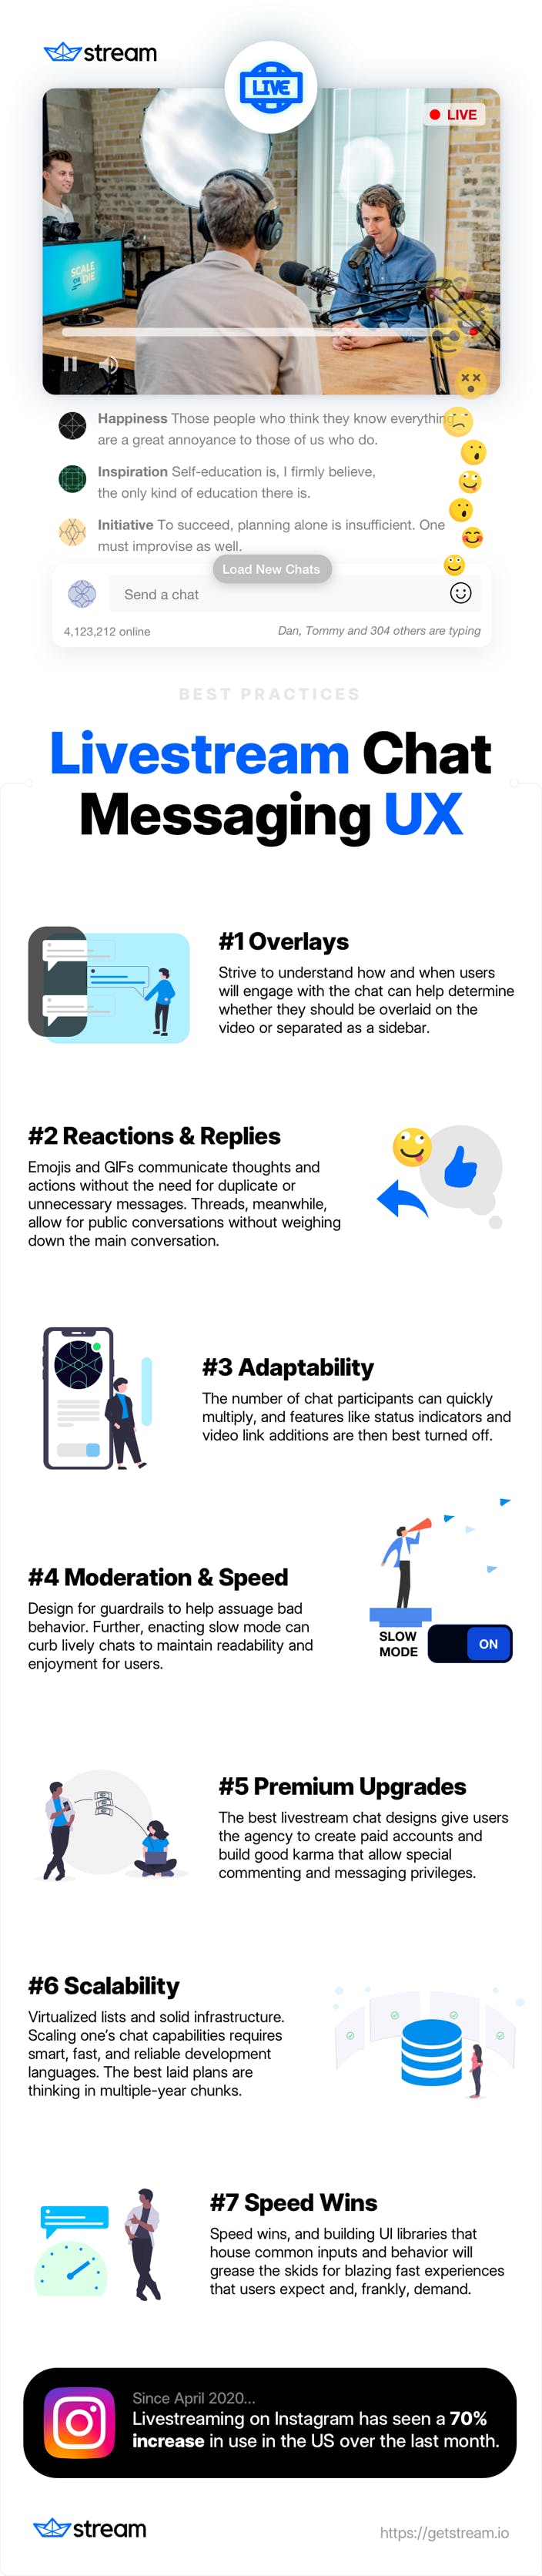 Infographic about UX best practies for livestream chat